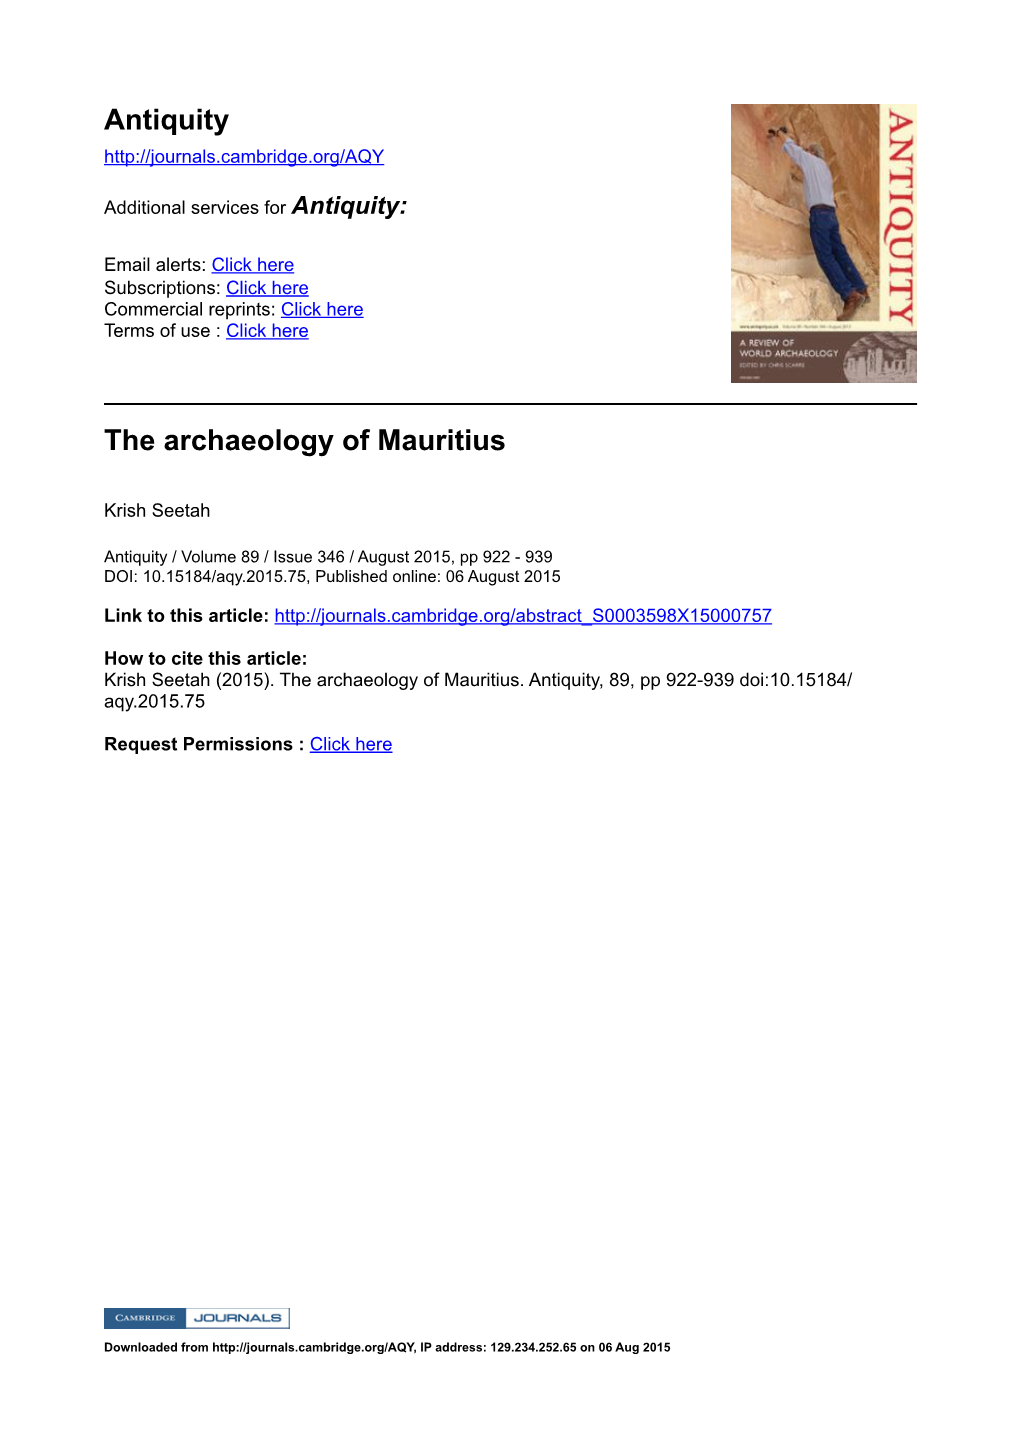 Antiquity the Archaeology of Mauritius